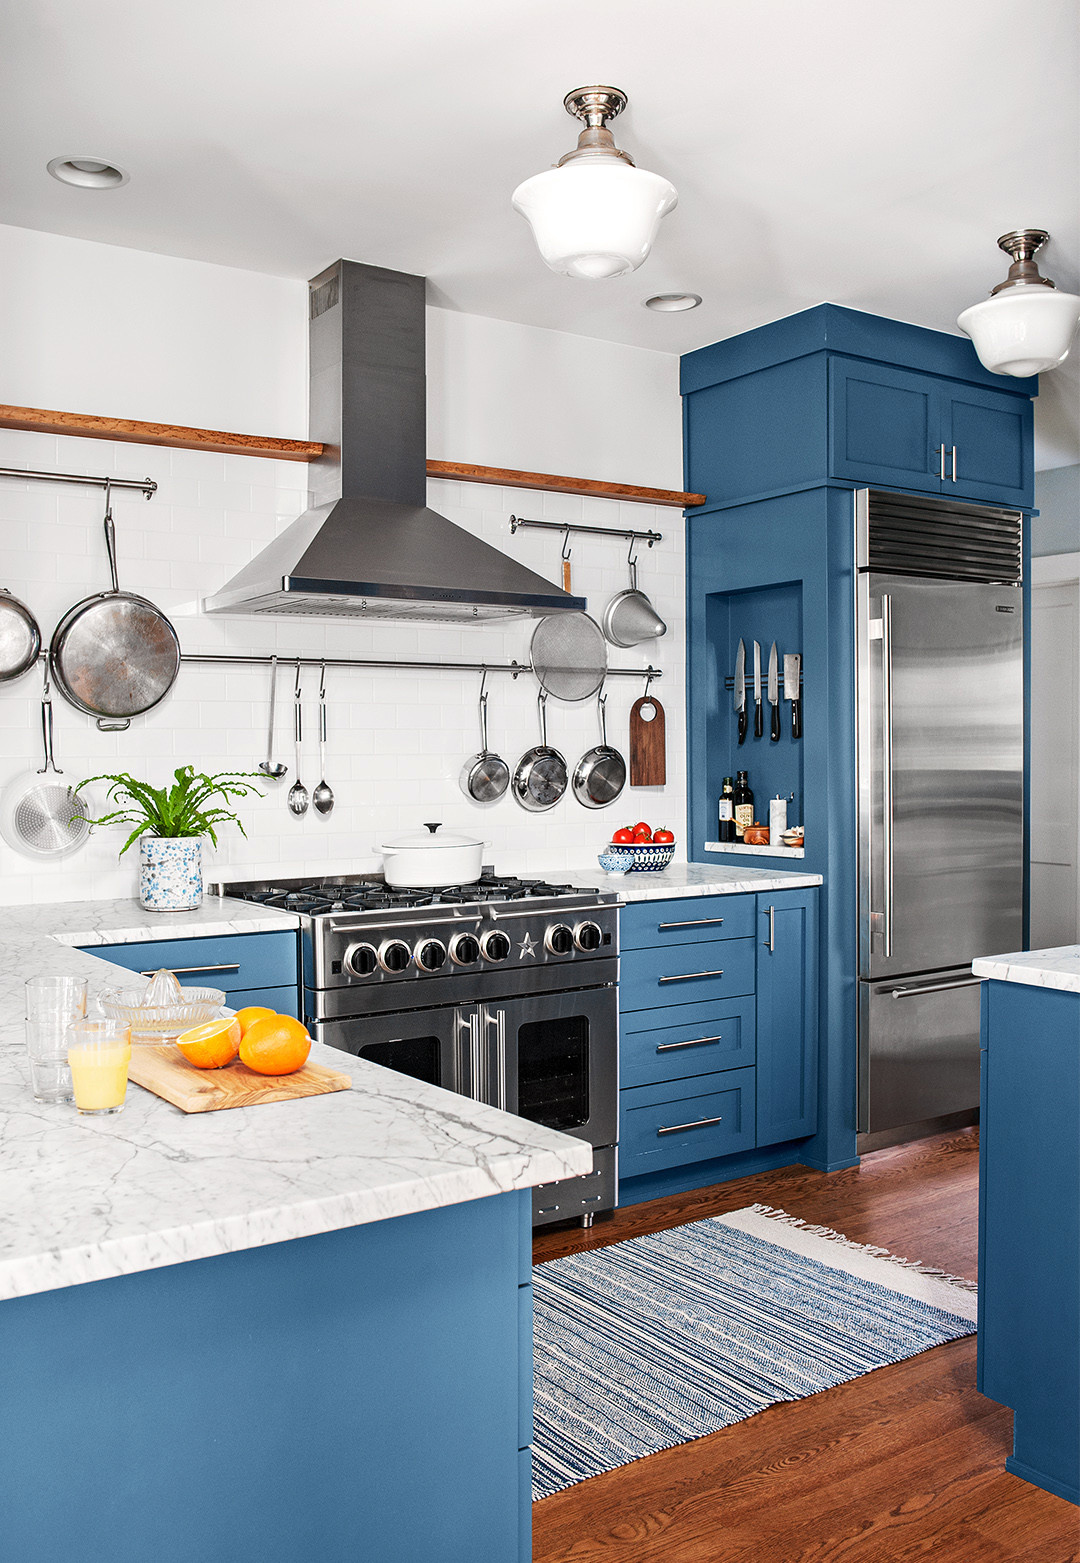 Kitchen Cabinets Colors 2020
 Kitchen Cabinet Hardware Trends 2019